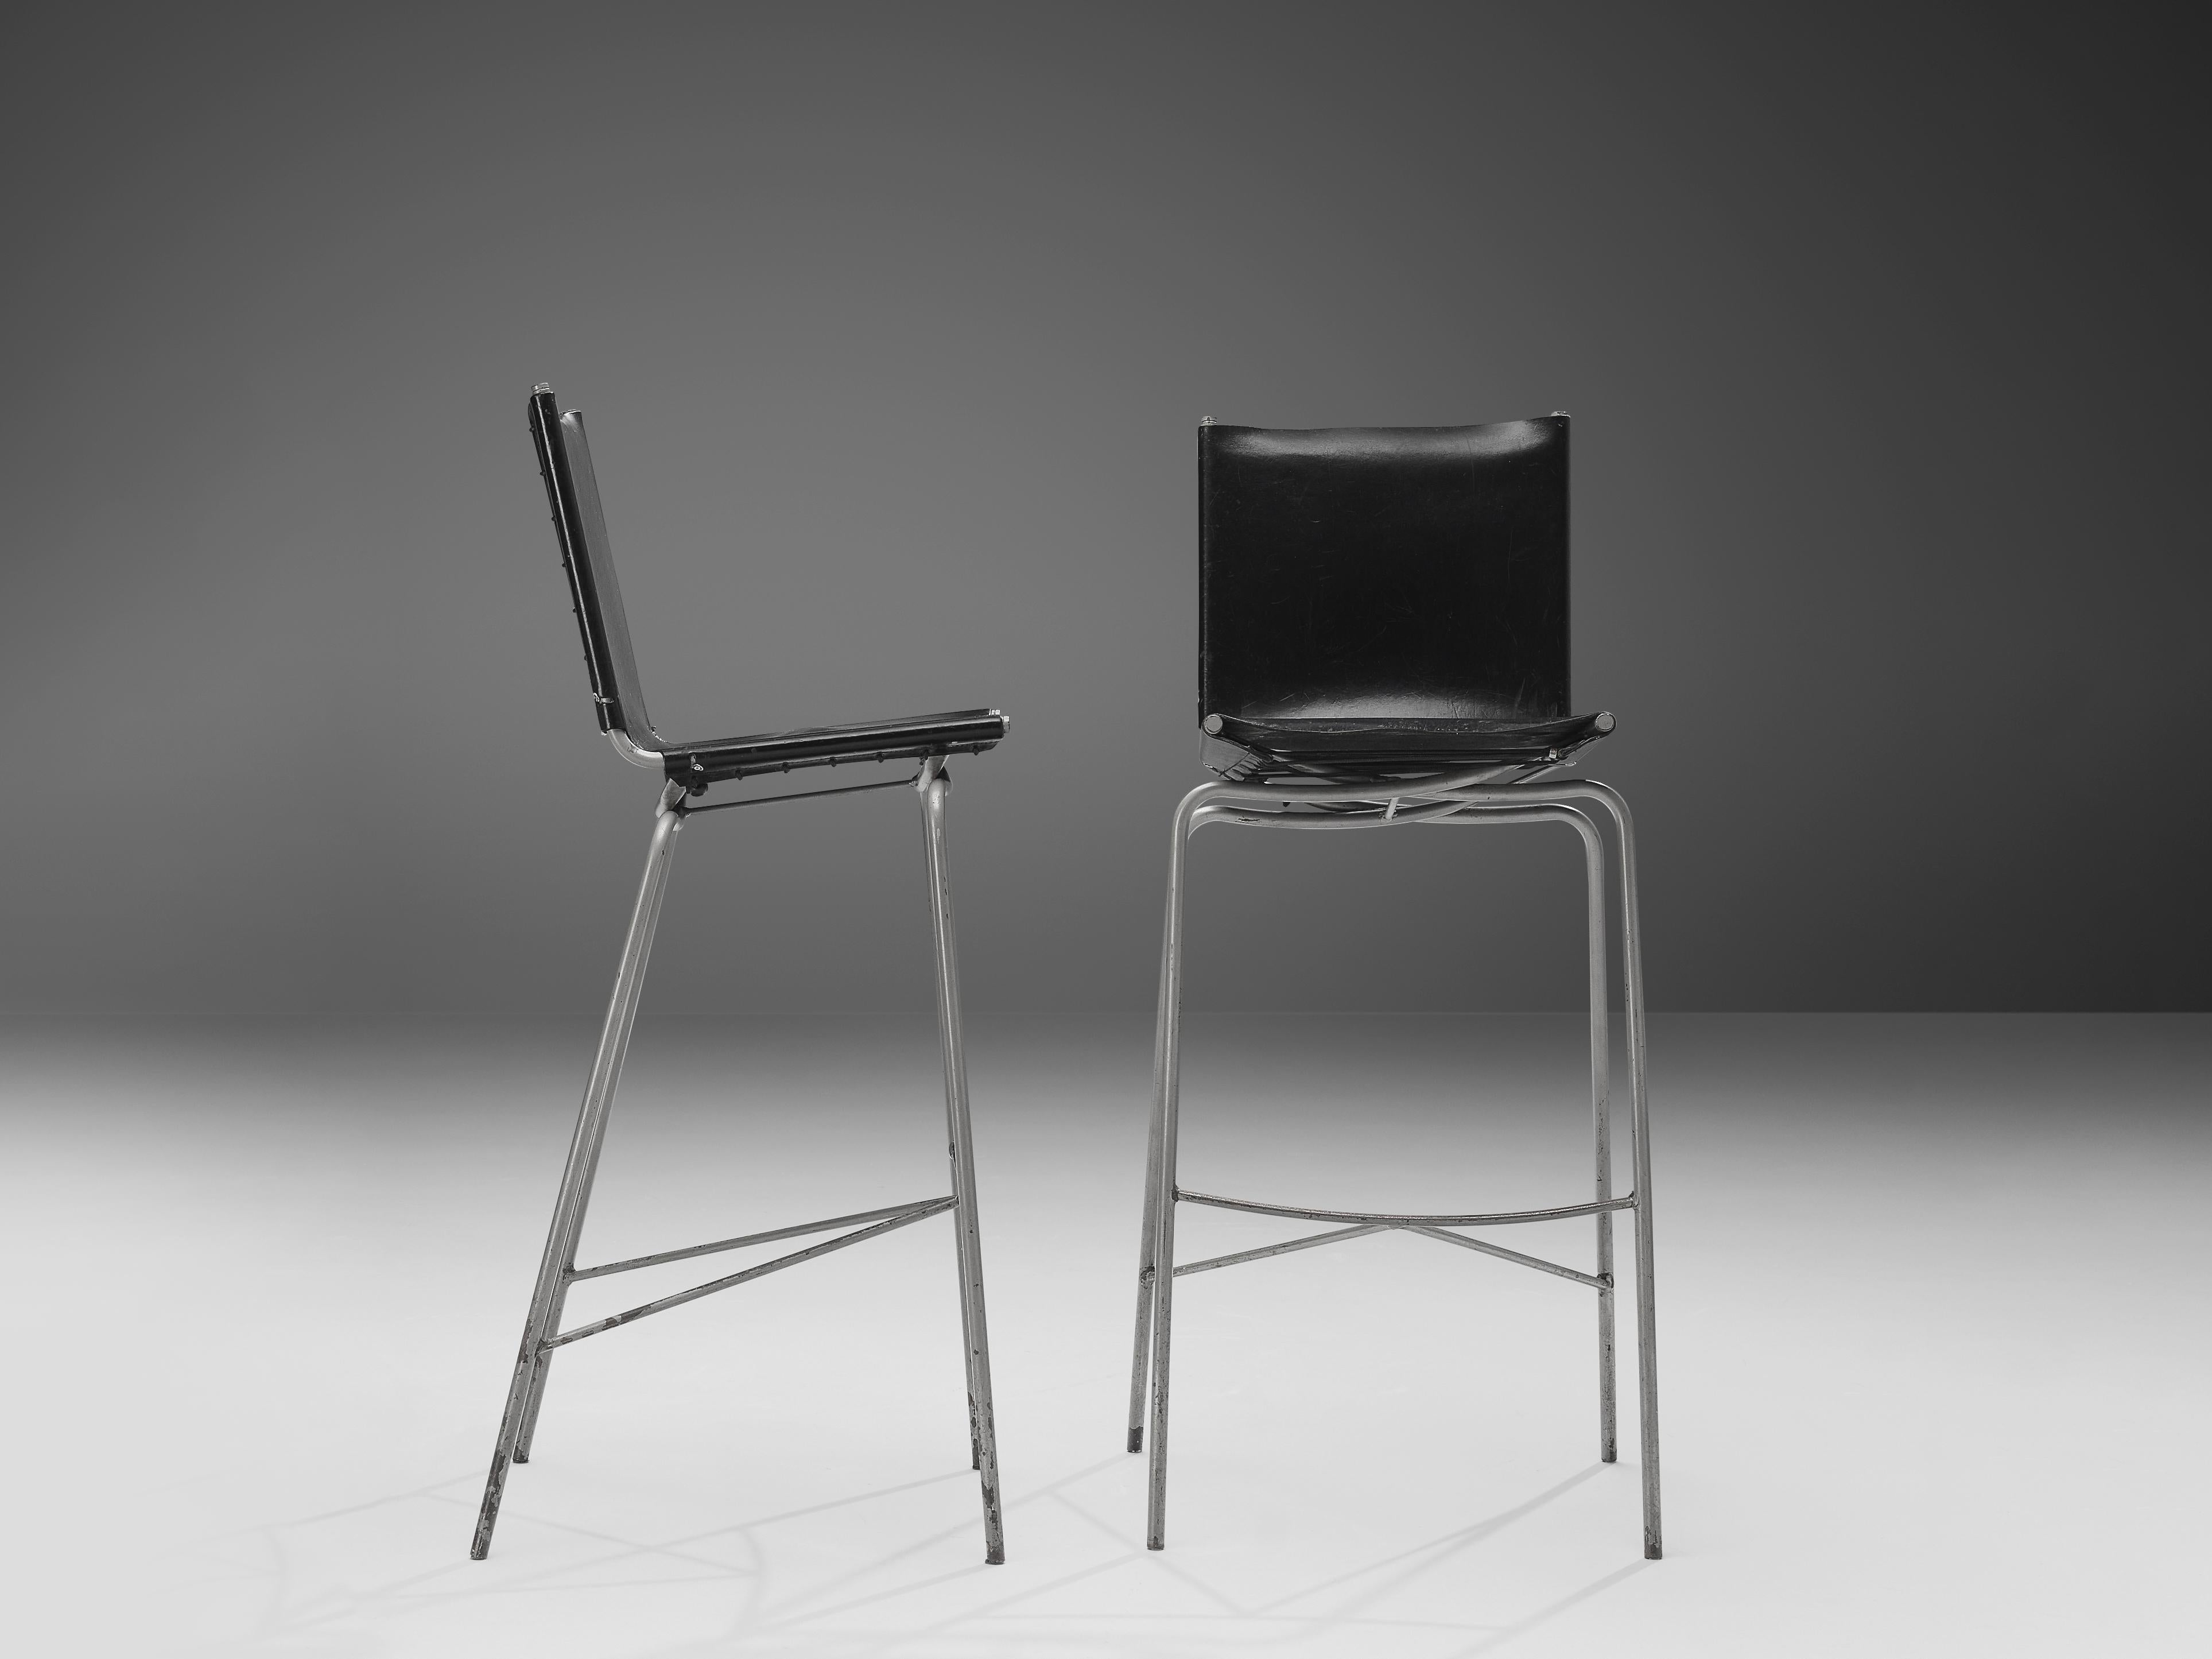 Fabiaan Van Severen, two bar stools, patinated black leather, tubular steel, lace, Belgium, 1997

Distinct bar stool by Belgium designer Fabiaan Van Severen. In 1997 van Severen created the design that features a patinated leather seat and backrest